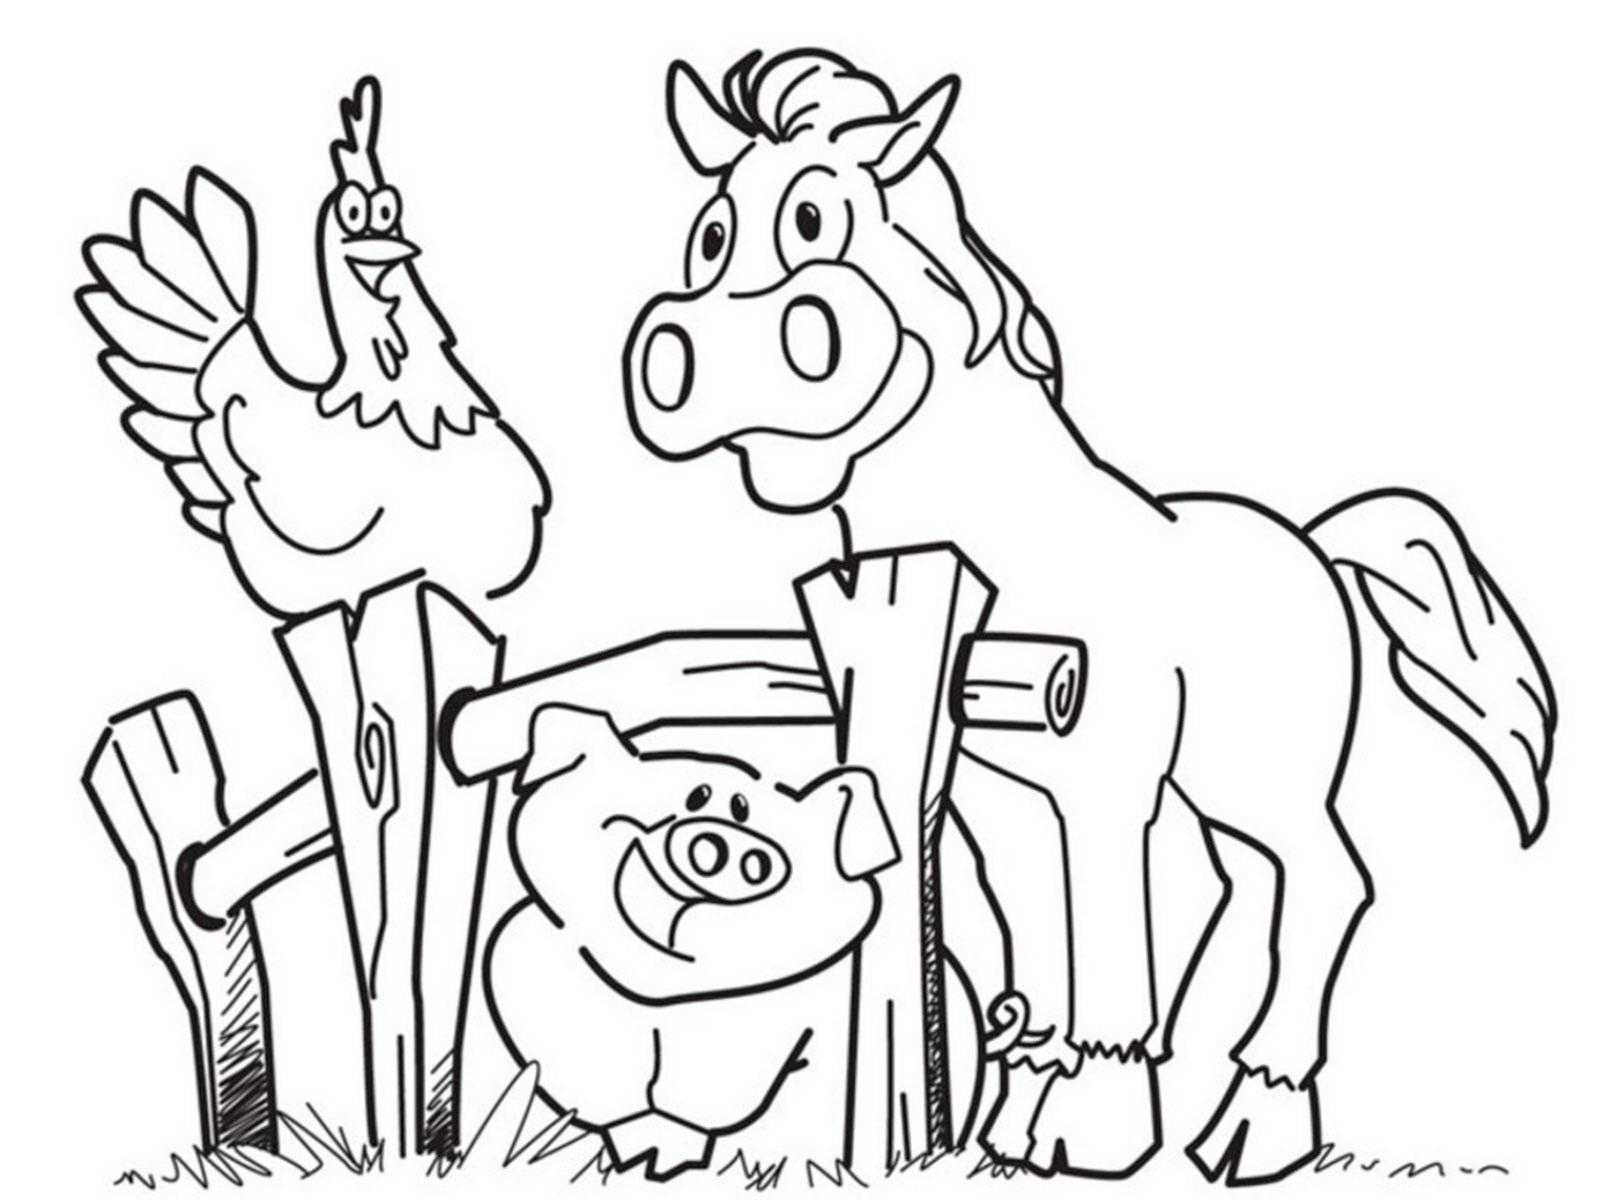 Coloring Farmyard with the Cockerel, pig and horse. Category Pets allowed. Tags:  rooster, horse, pig, backyard.